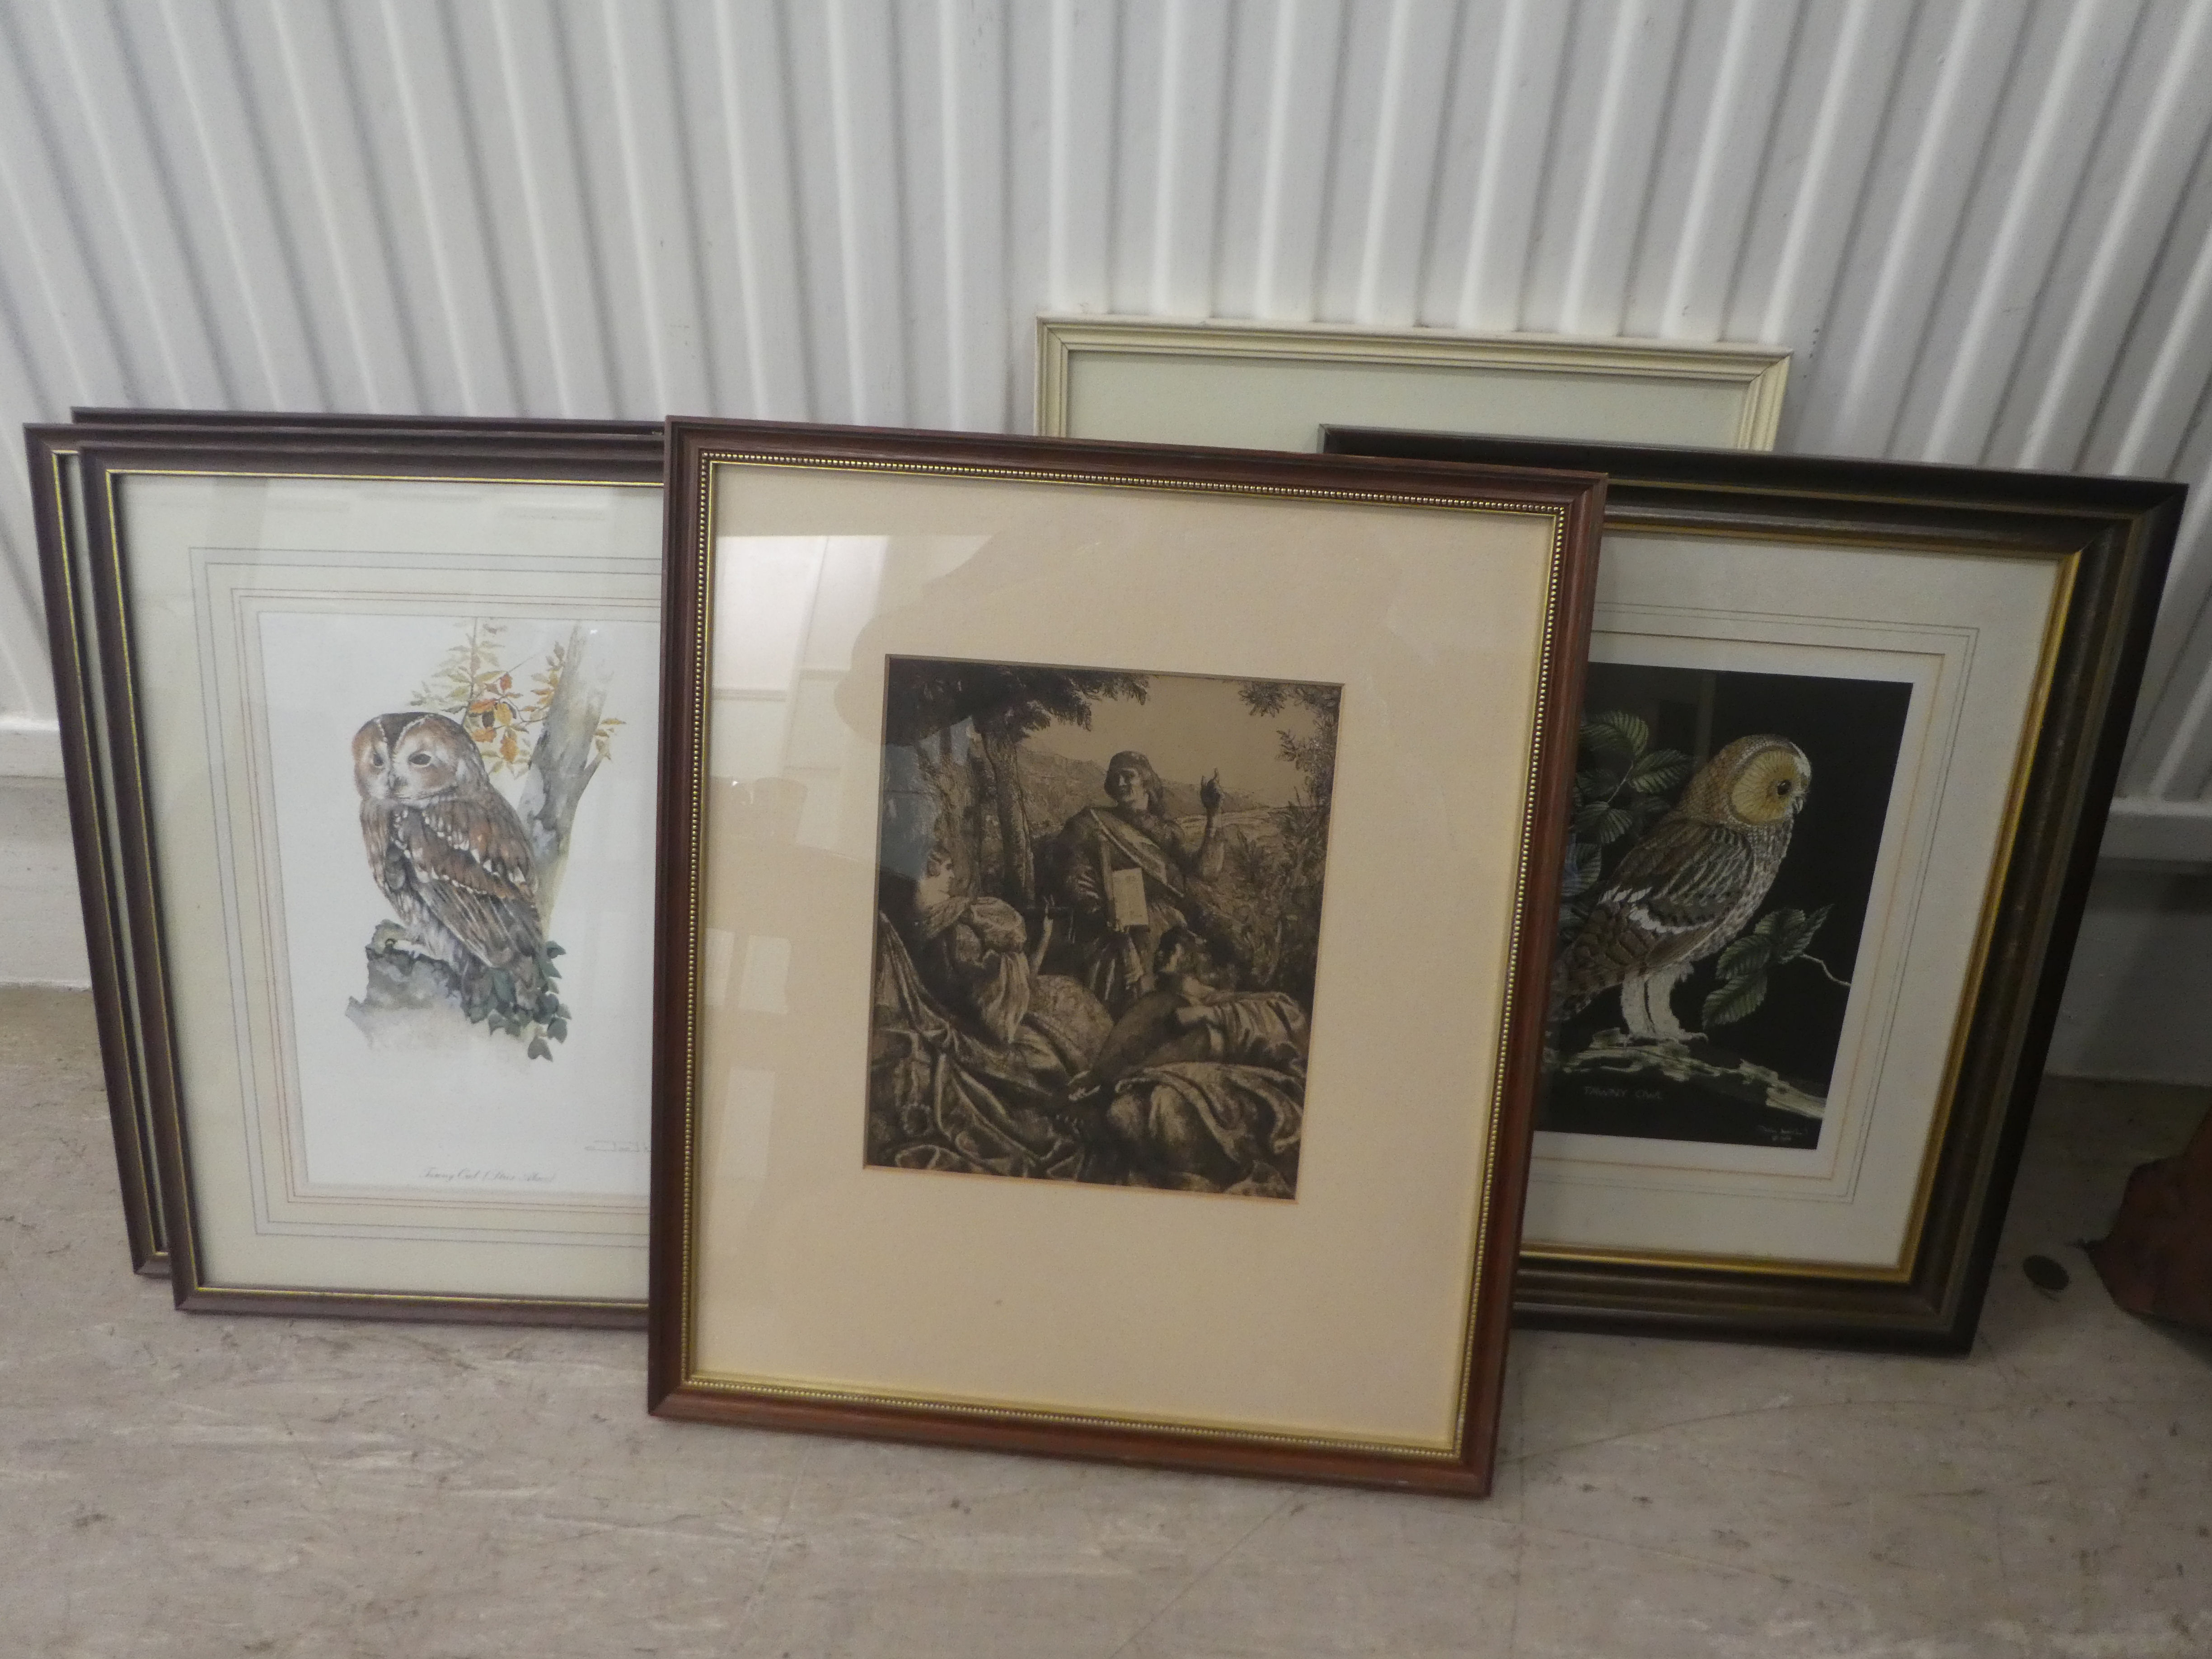 Framed pictures and prints: to include after Joel Kirk - 'Owls'  print  7" x 9" - Image 4 of 5